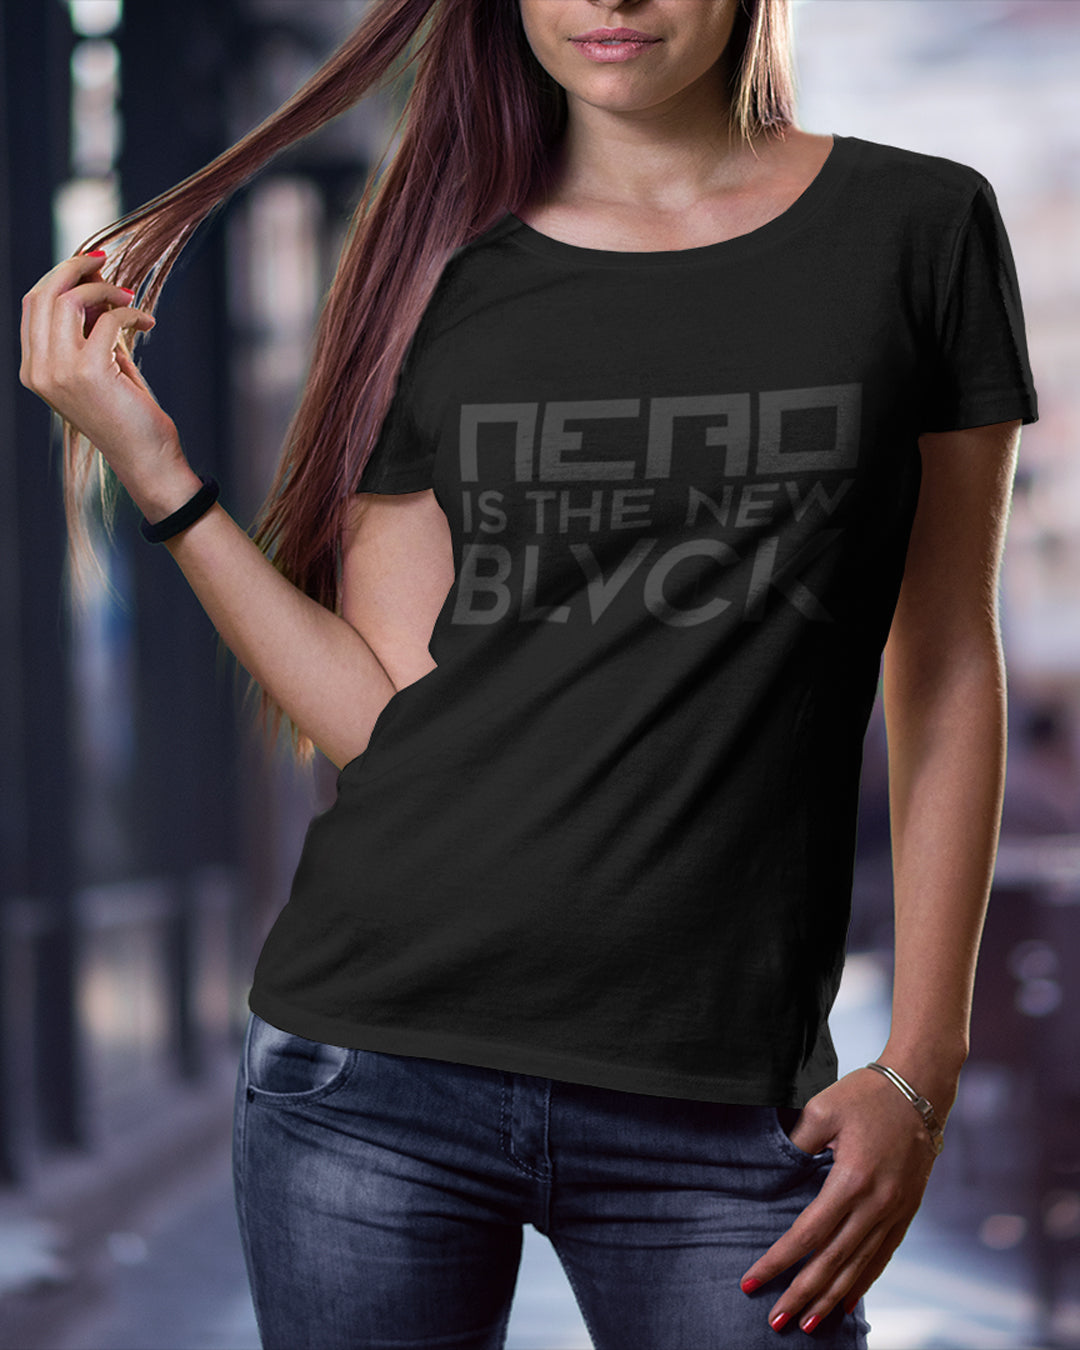 NERO IS THE NEW BLVCK - Women's Relaxed Black T-Shirt – NERO STREET STYLE